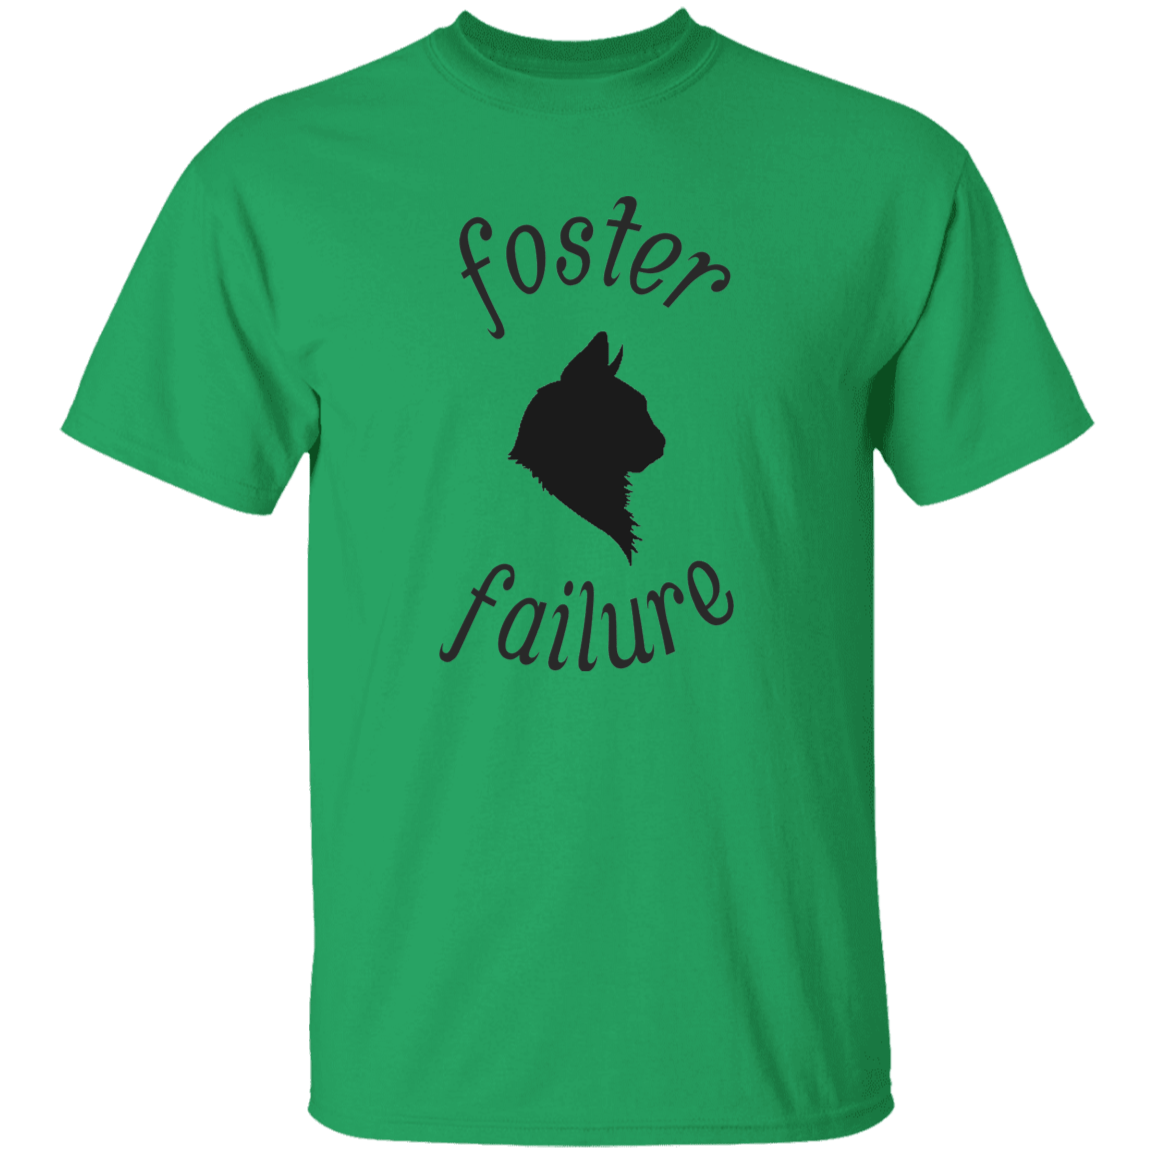 Foster Failure Cat - Youth T-Shirt.